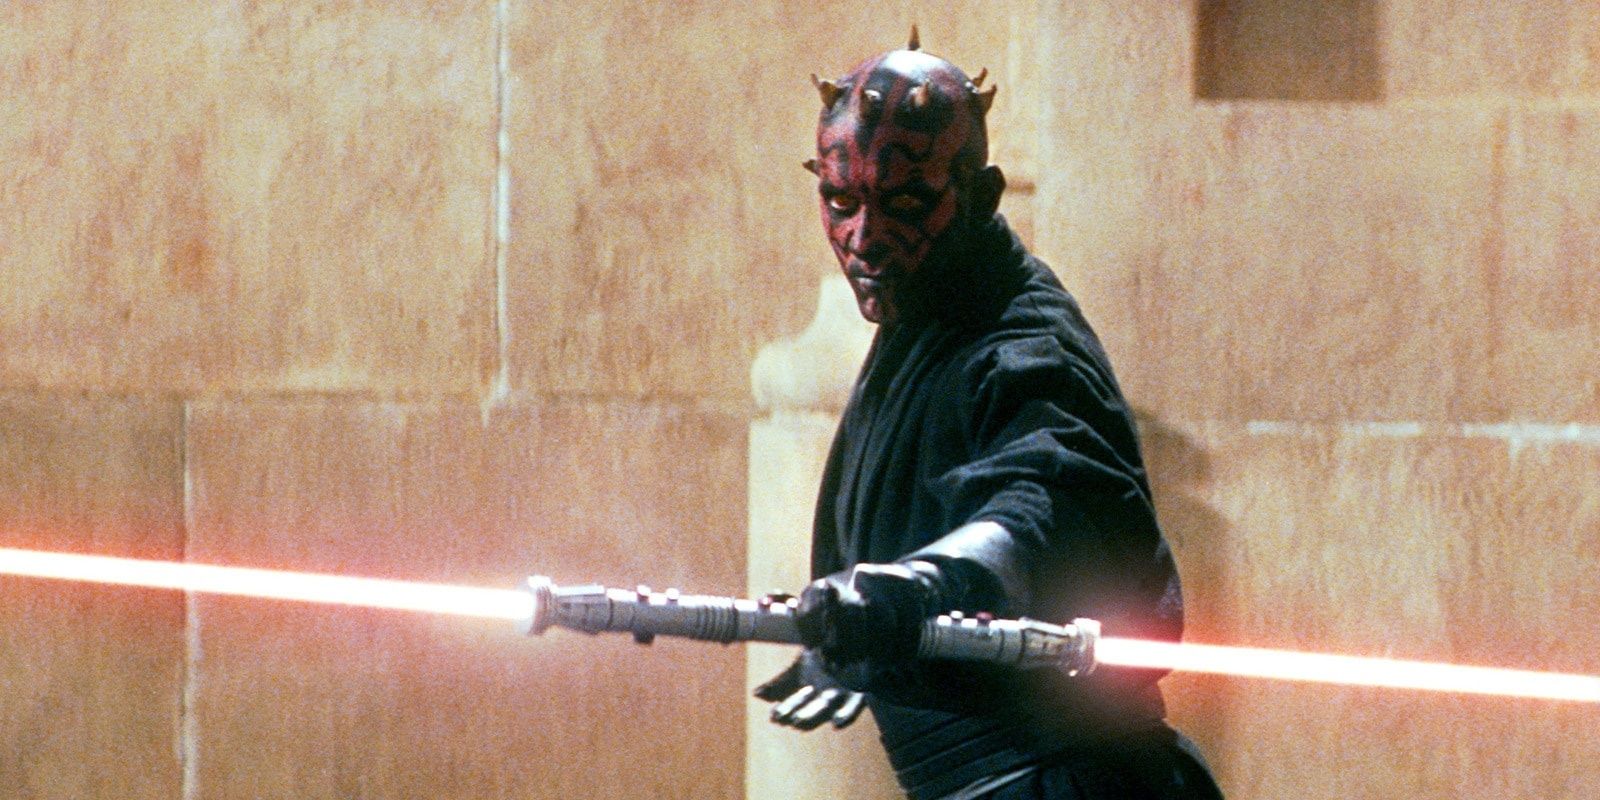 Darth Maul wields a double-bladed lightsaber in The Phantom Menace